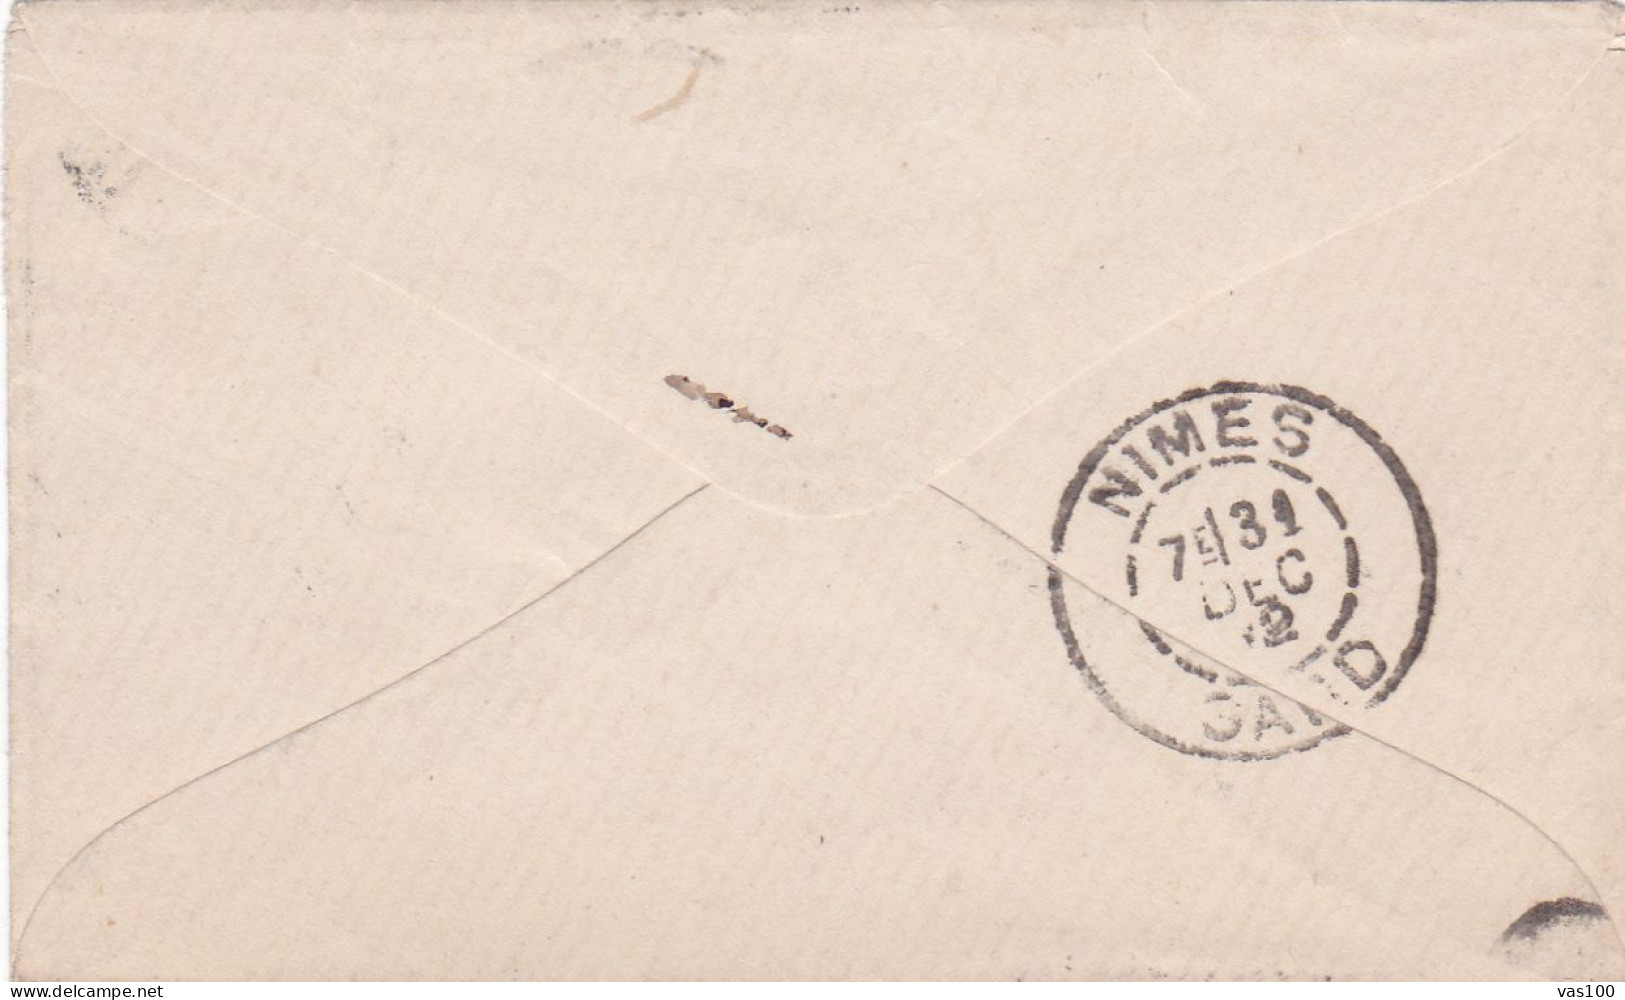 RUSSIA - Postal History - COVER To FRANCE 1891 NIMES - Lettres & Documents